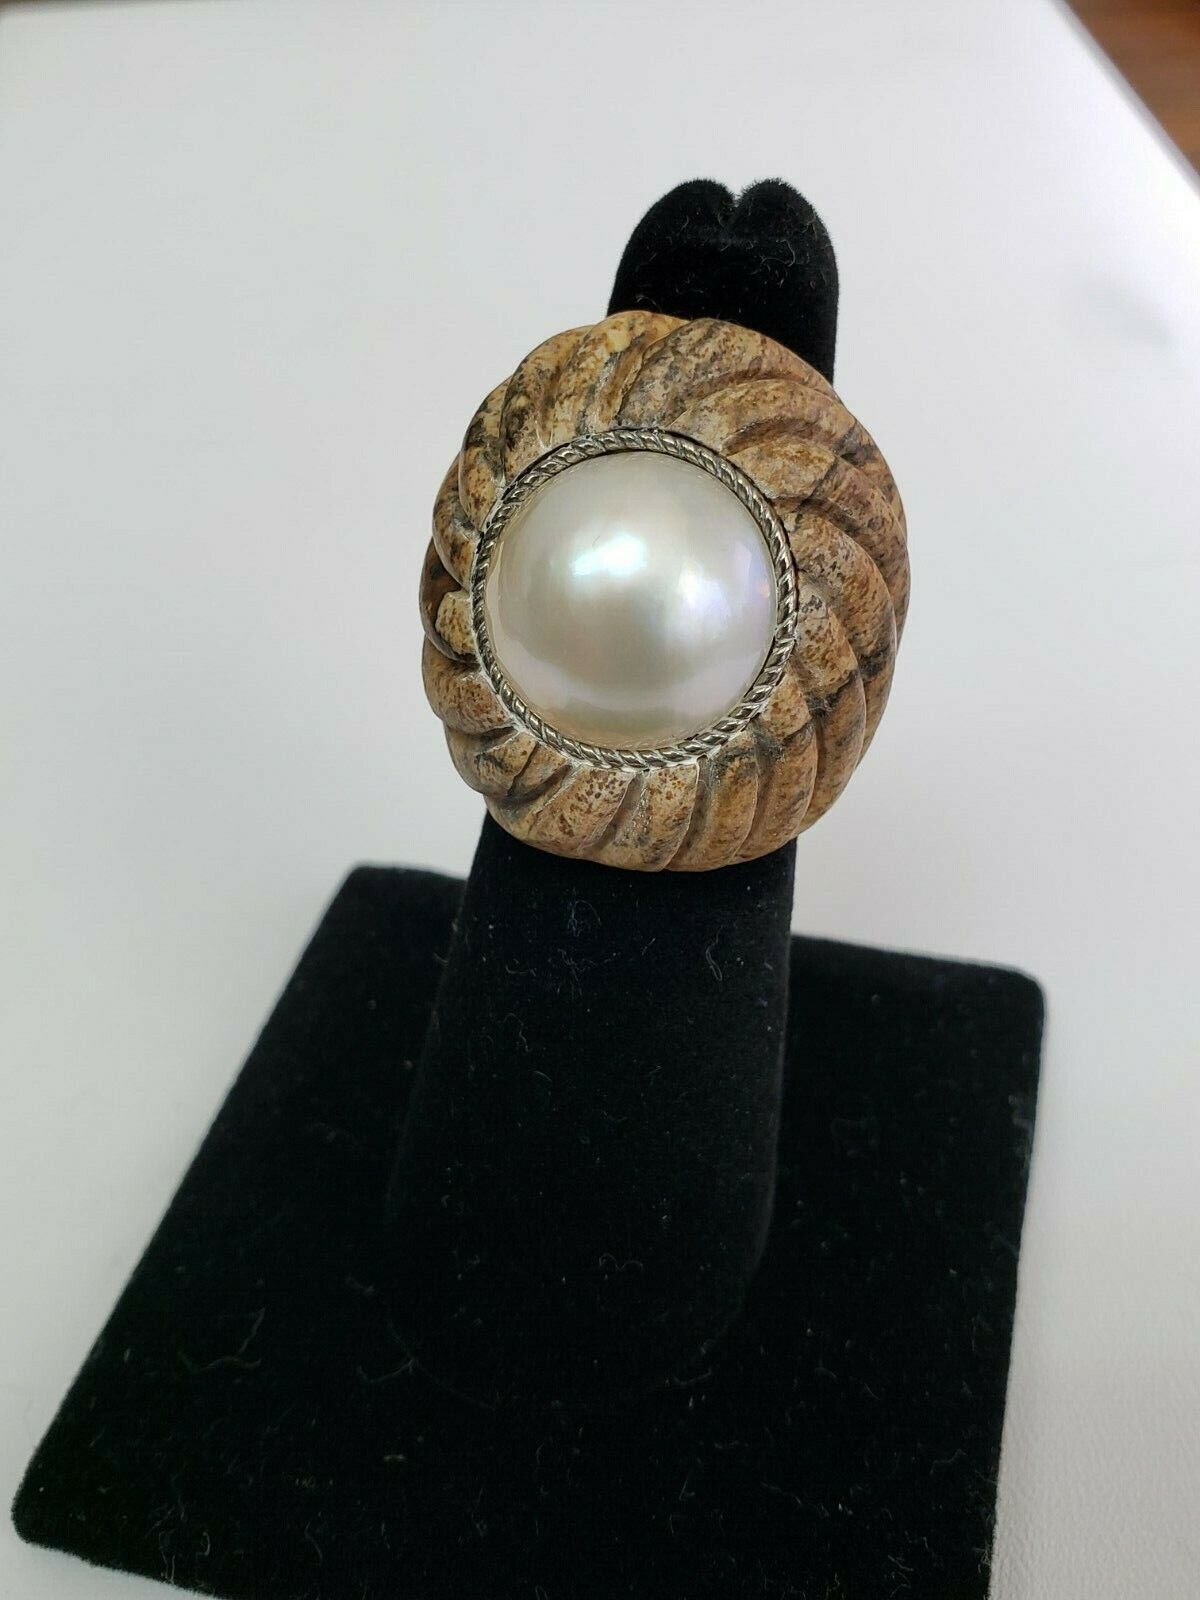 Colleen Lopez Calcite And Cultured Mabé Pearl Ring, Size 5.5 Hsn $60